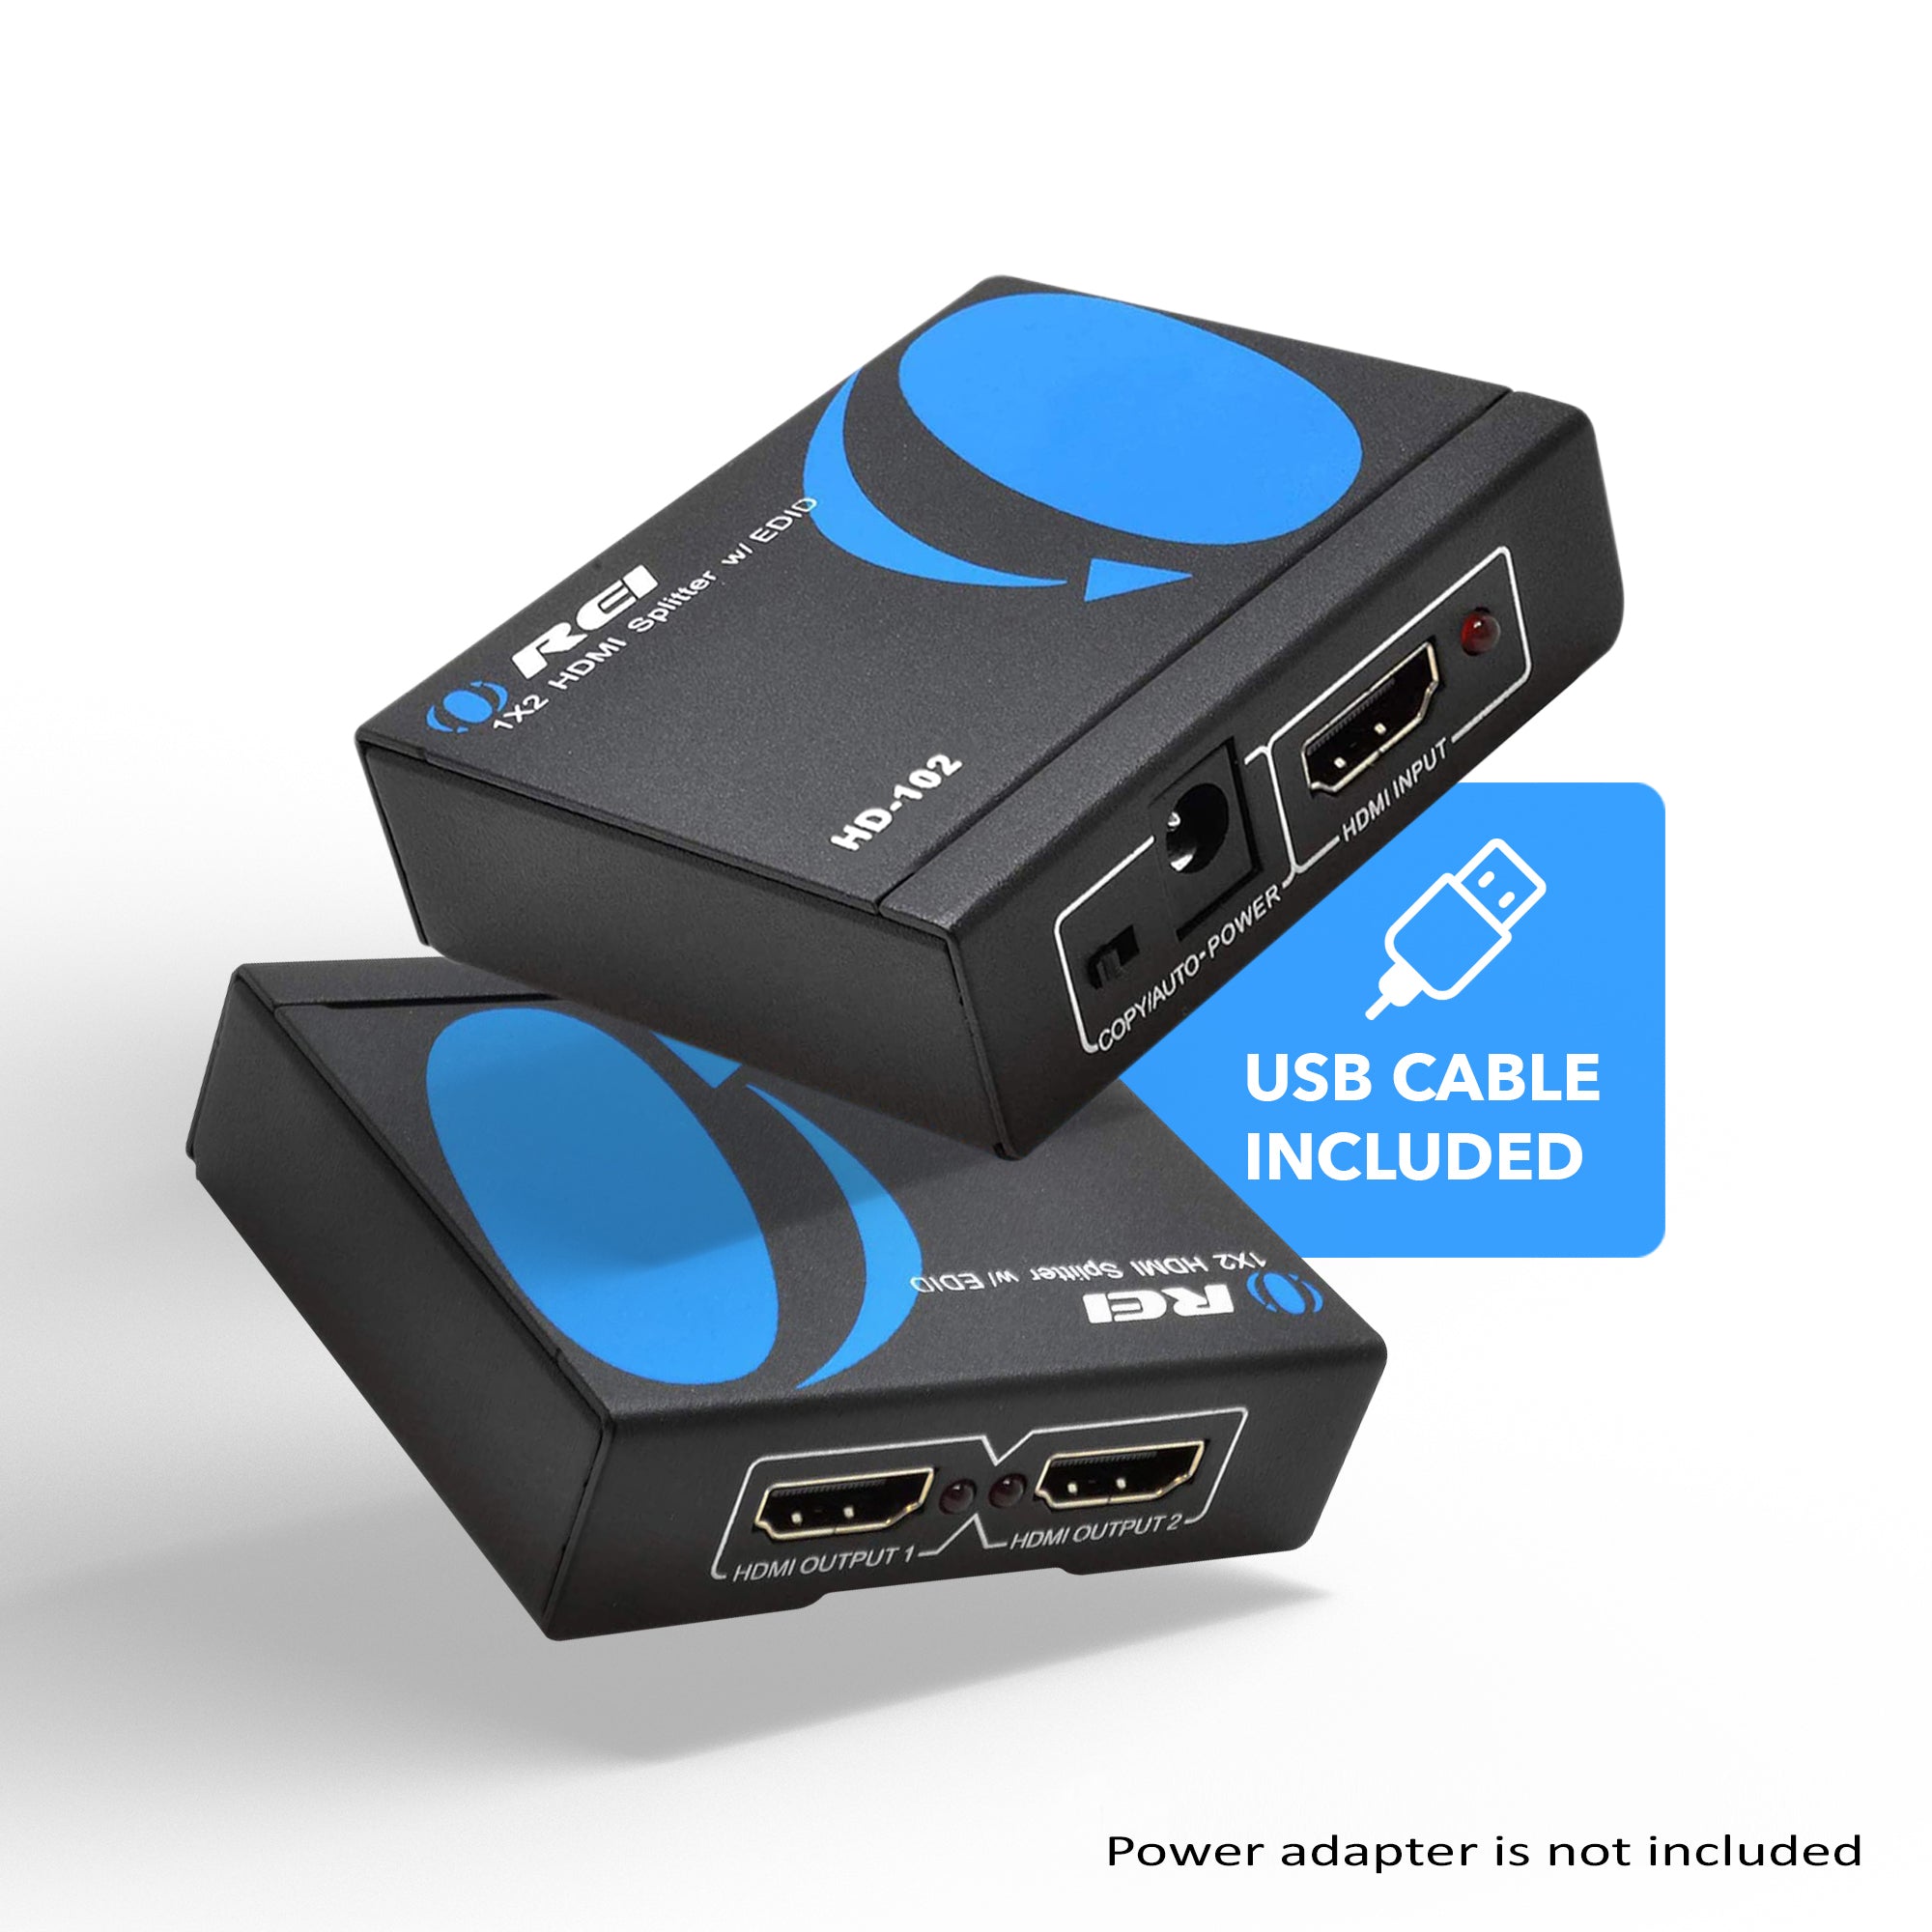 OREI HD-102 1x2 1 Port HDMI Powered Splitter Ver 1.3 Certified for Full HD 1080p & 3D Support (One Input to Two Outputs)